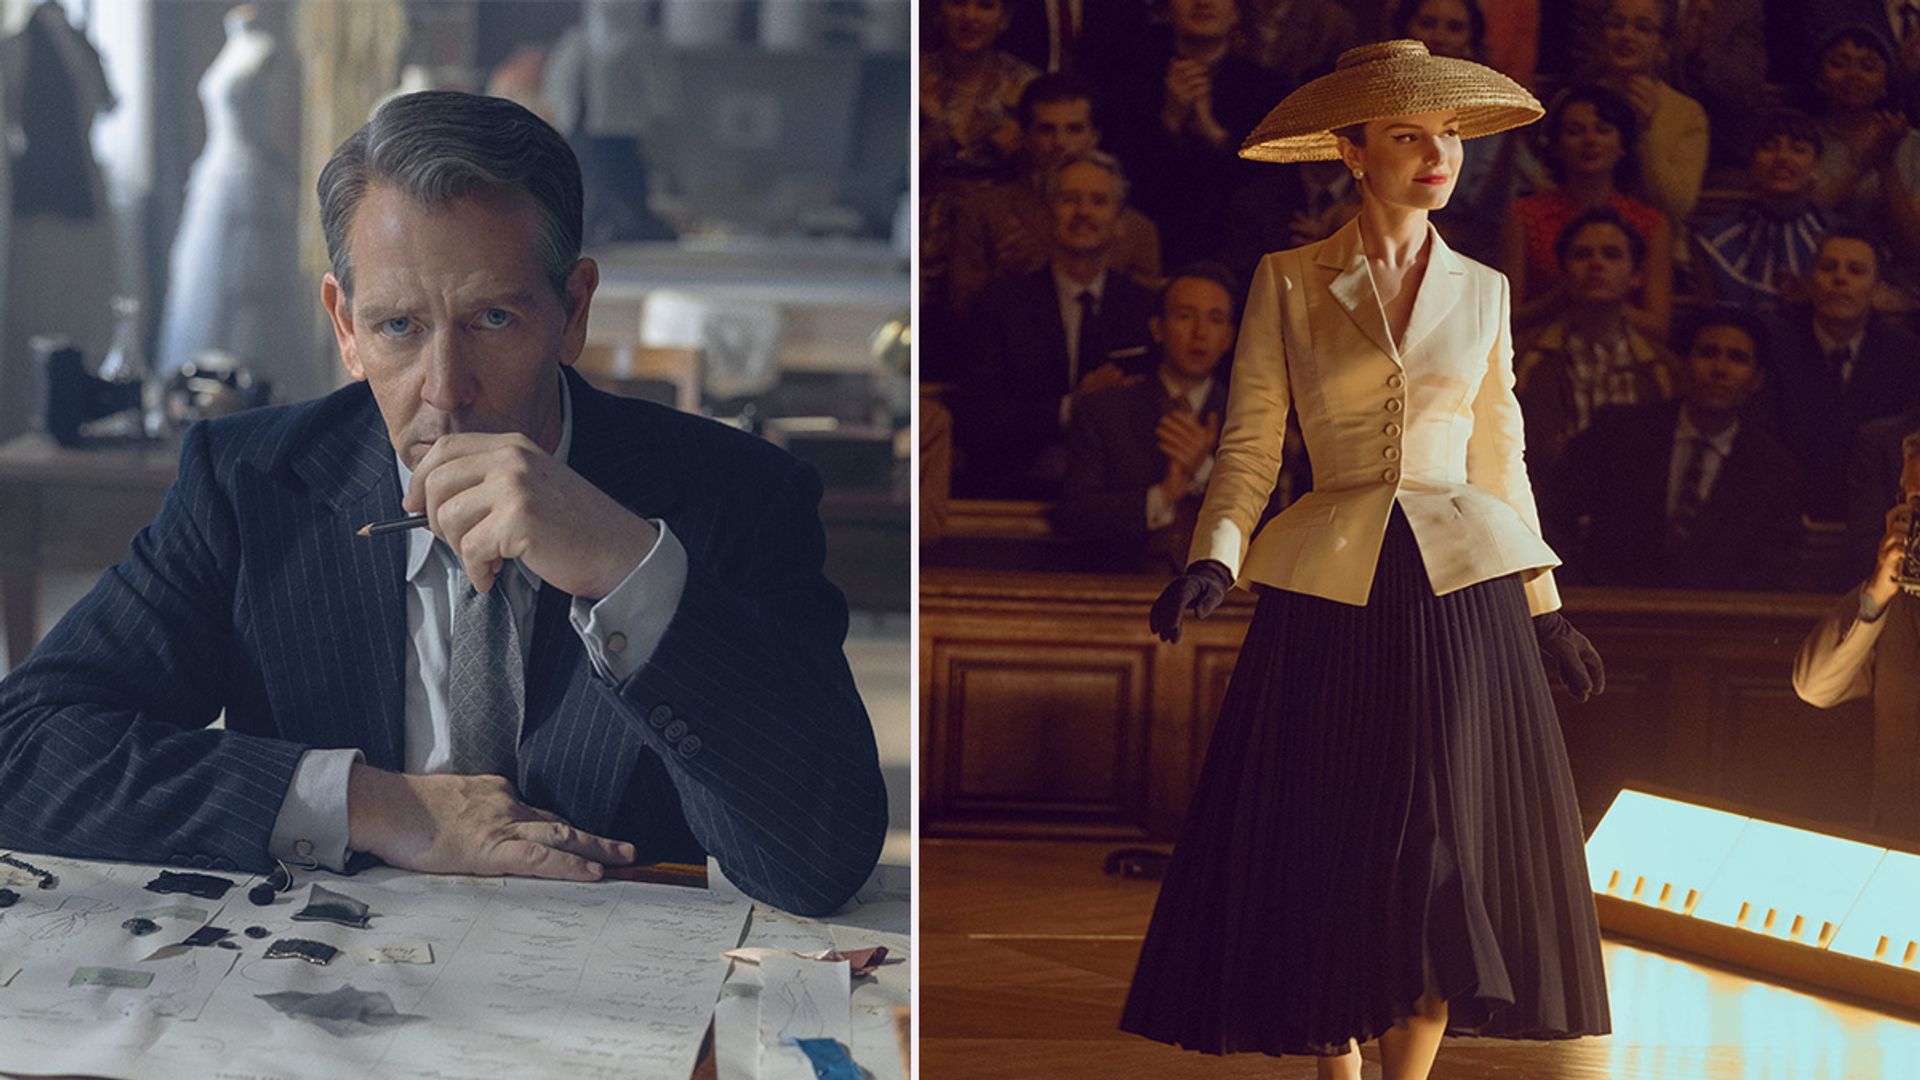 Ben Mendelsohn as Dior and Bar Suit dress in Apple TV+'s The New Look